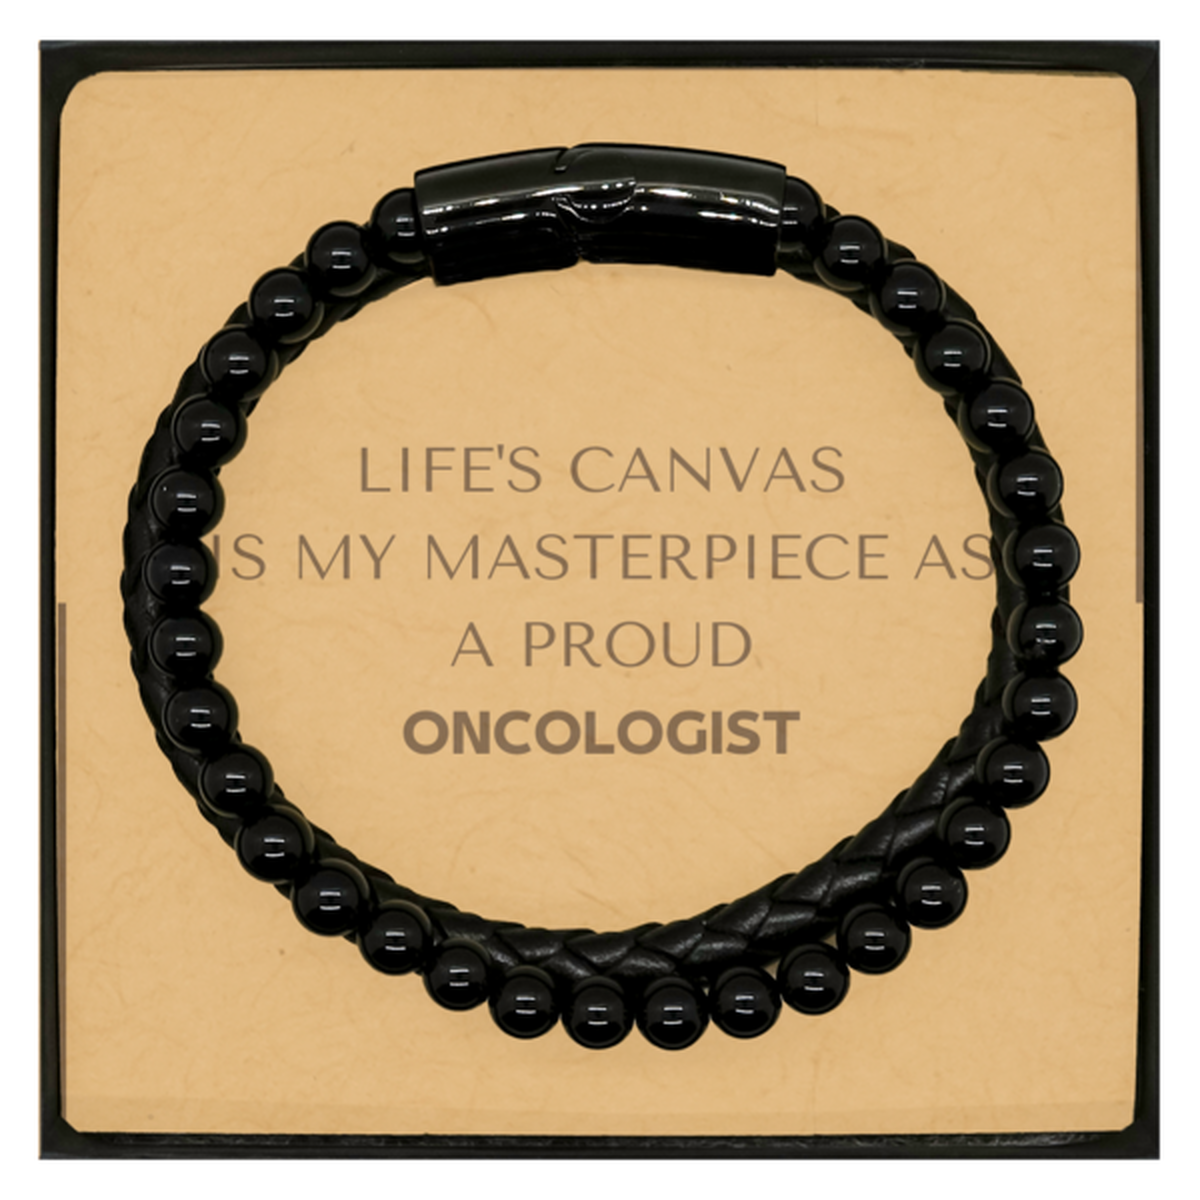 Proud Oncologist Gifts, Life's canvas is my masterpiece, Epic Birthday Christmas Unique Stone Leather Bracelets For Oncologist, Coworkers, Men, Women, Friends